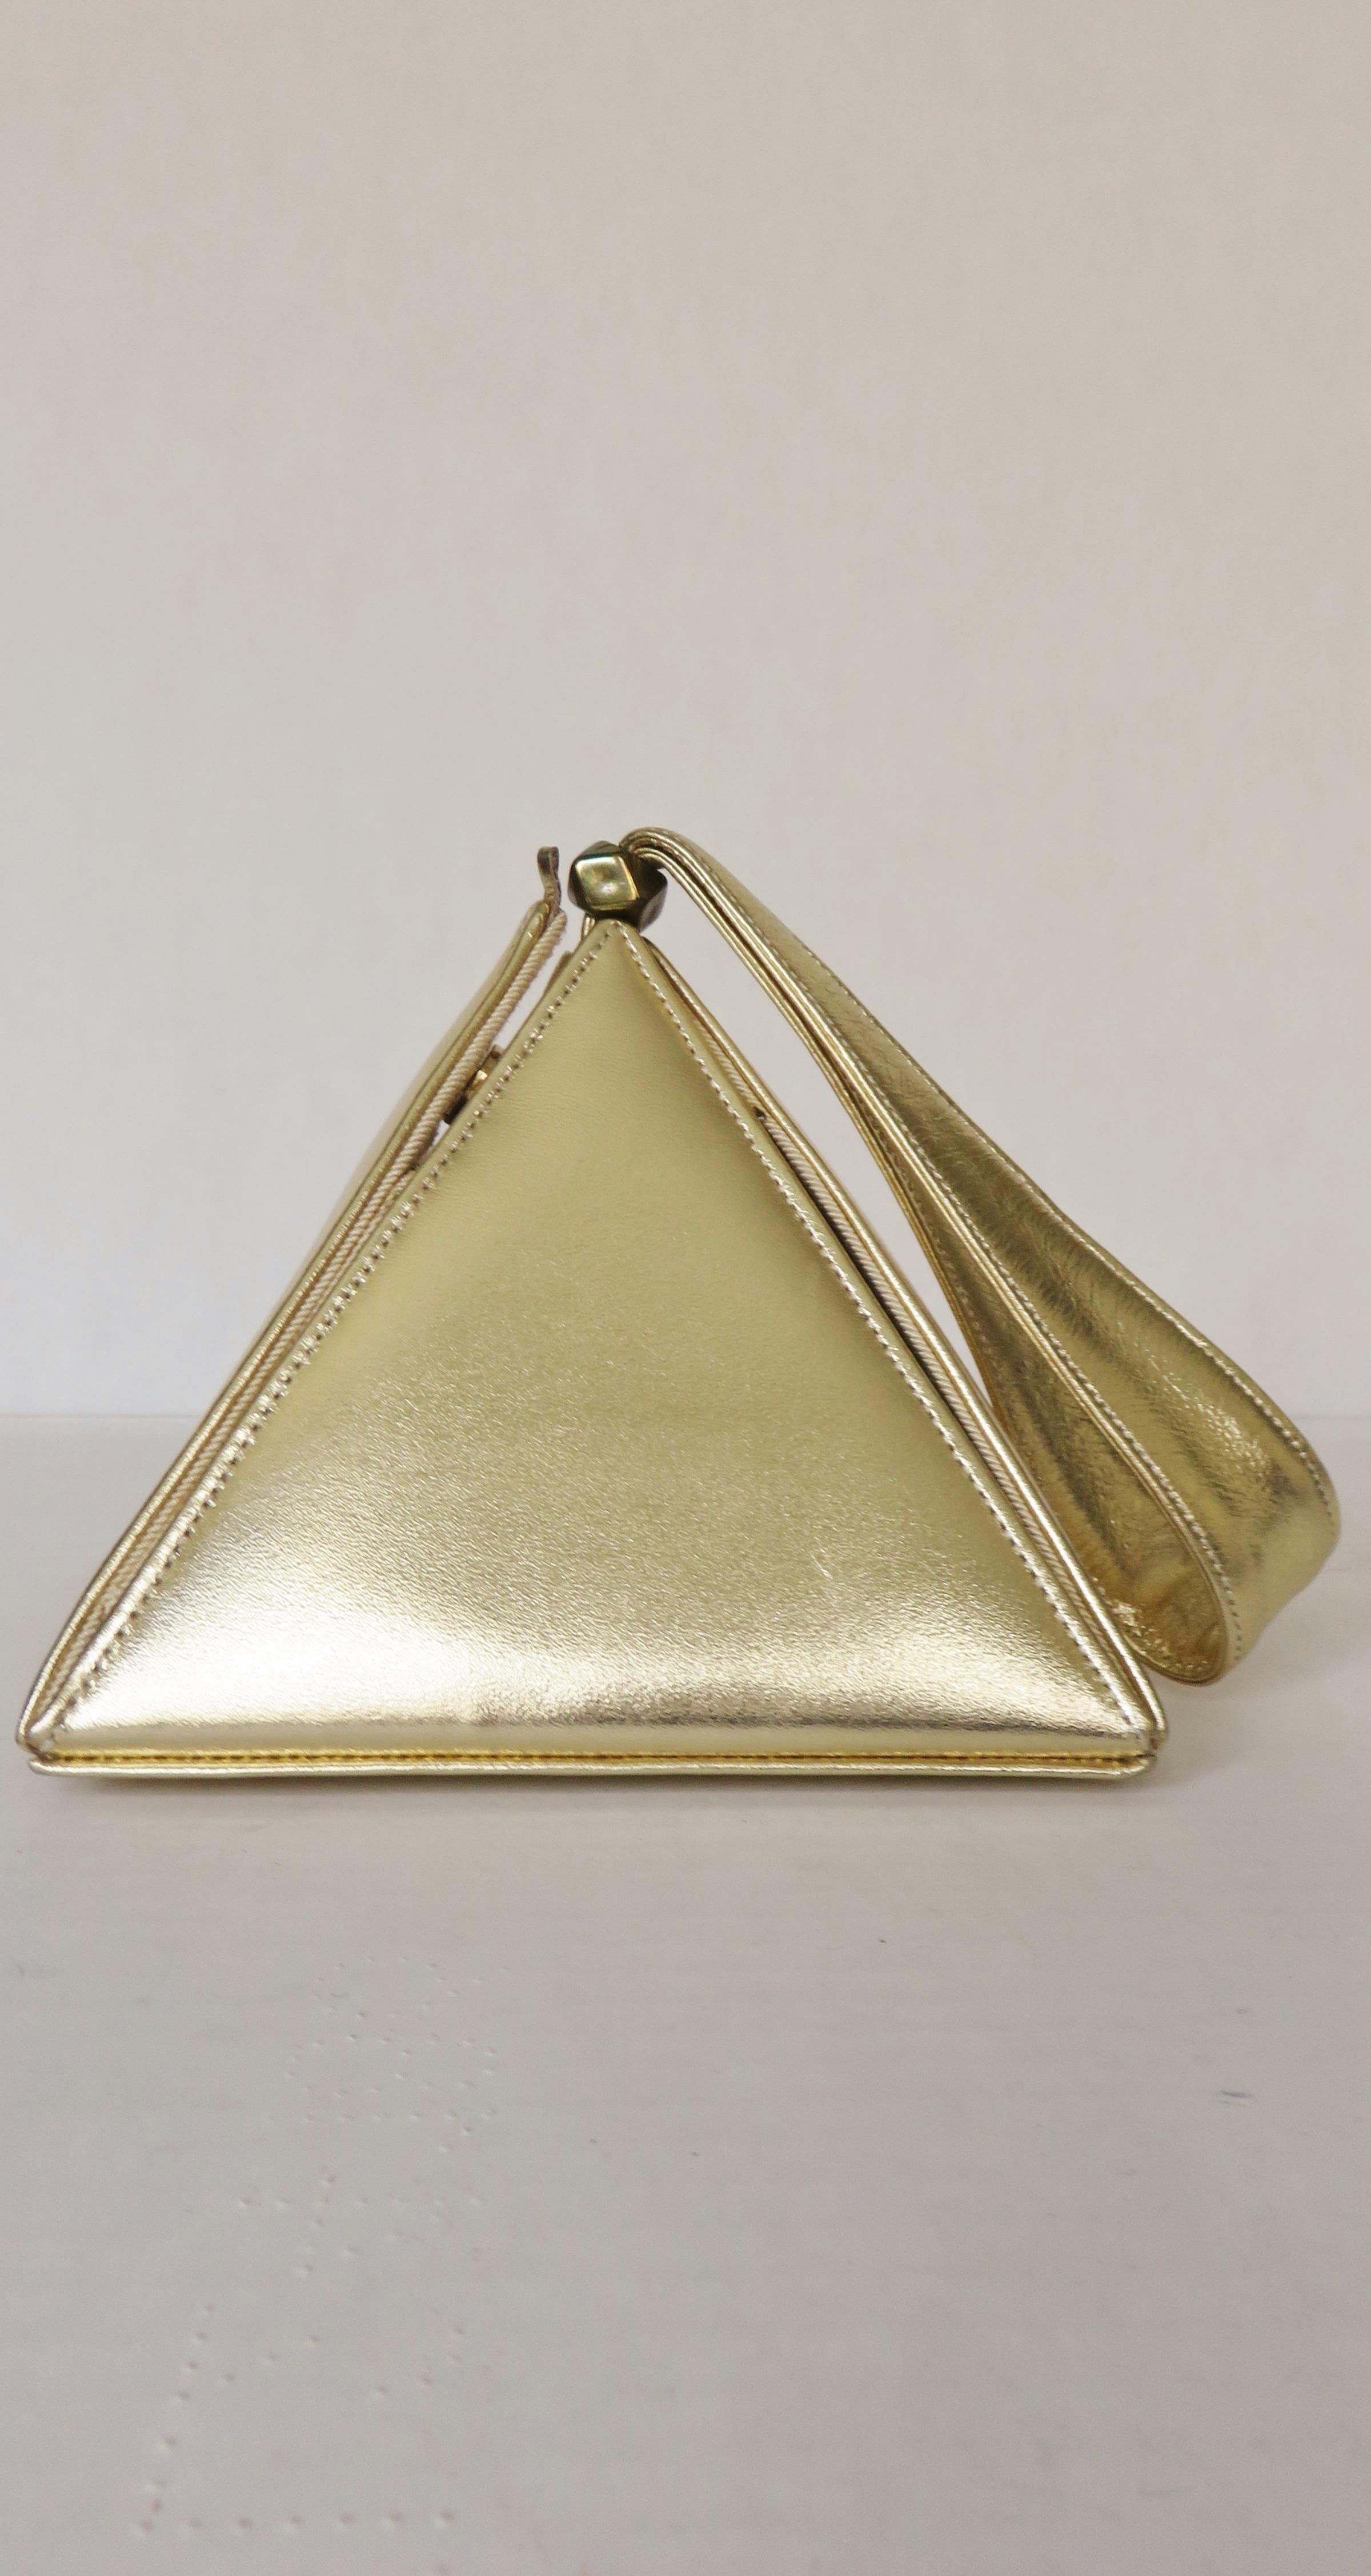 A gorgeous gold leather triangular box purse from Carey Adina.  It has 4 triangular panels emanating from a square base with small feet. One of these panels opens with a small tab and snaps closed.  It has a top handle and is lined in matching silk